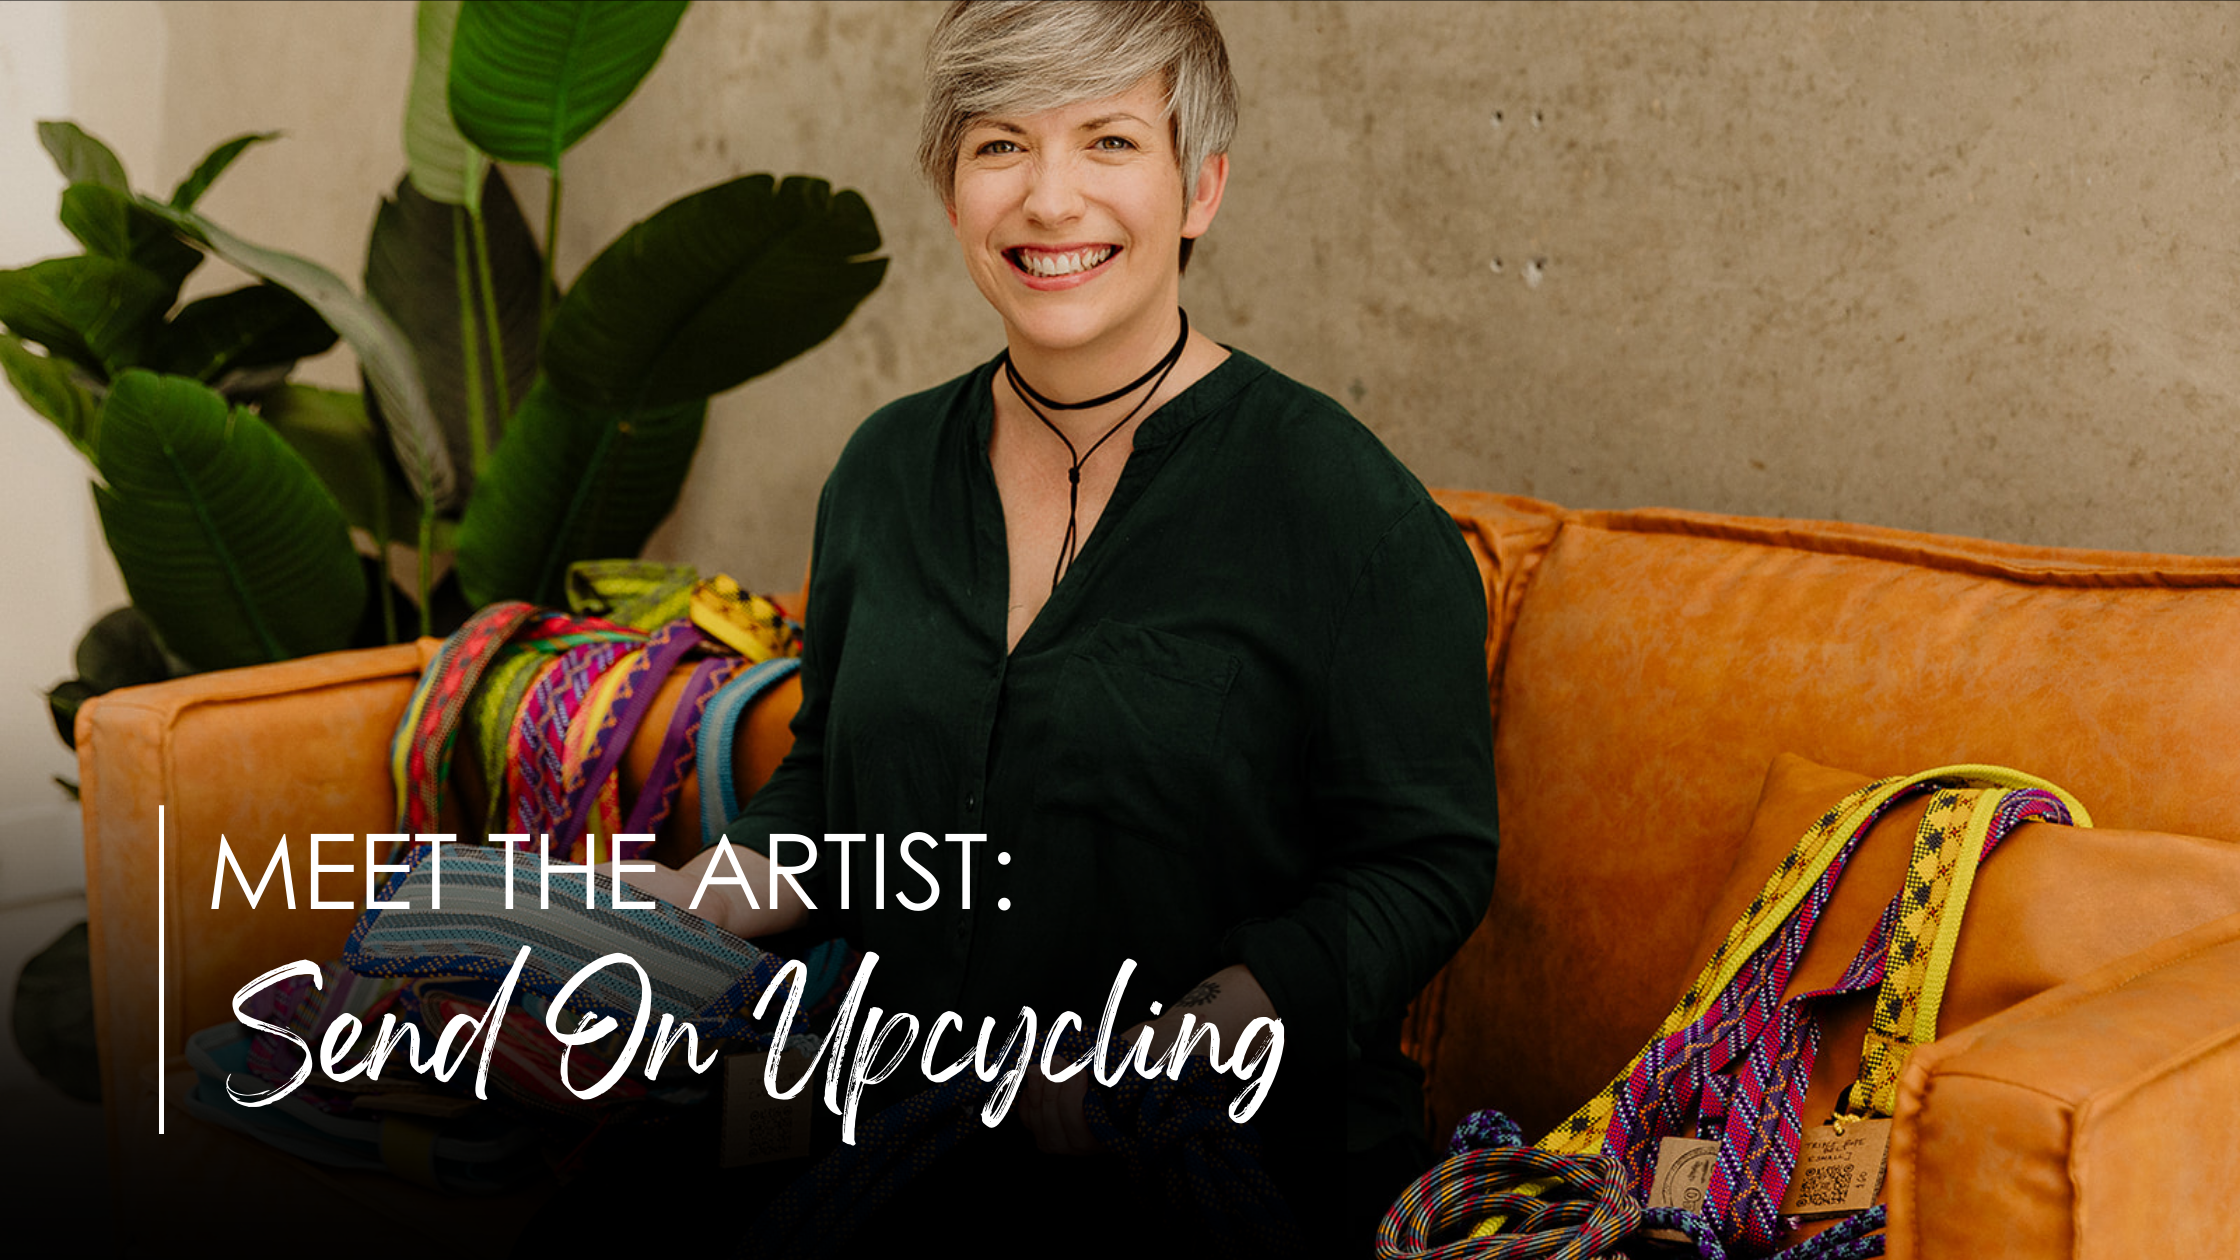 Meet the Artist: Send On Upcycling